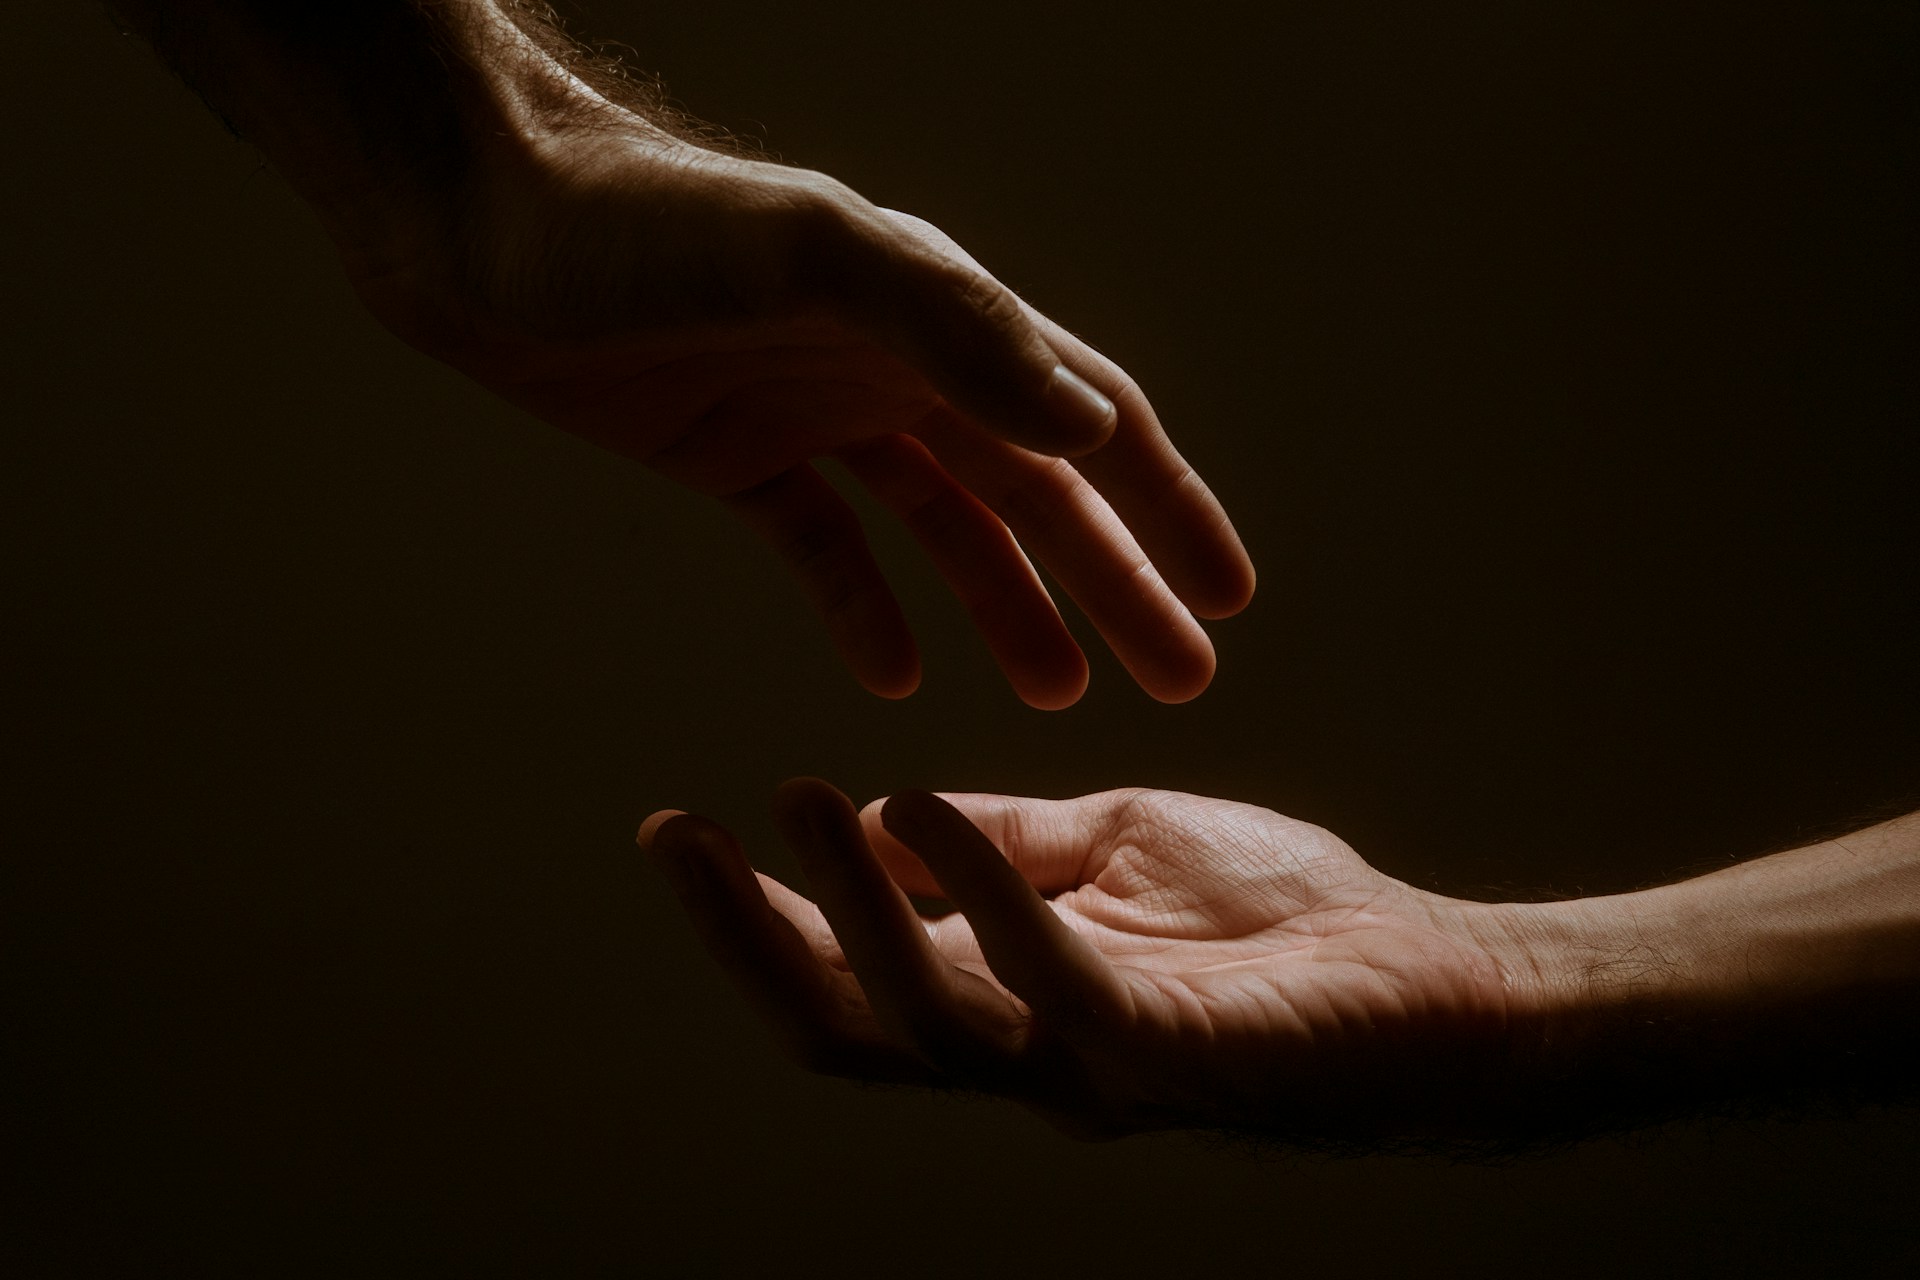 10 Tips for Helping Someone on the Path to Sobriety. Image - 2 hands helping each other